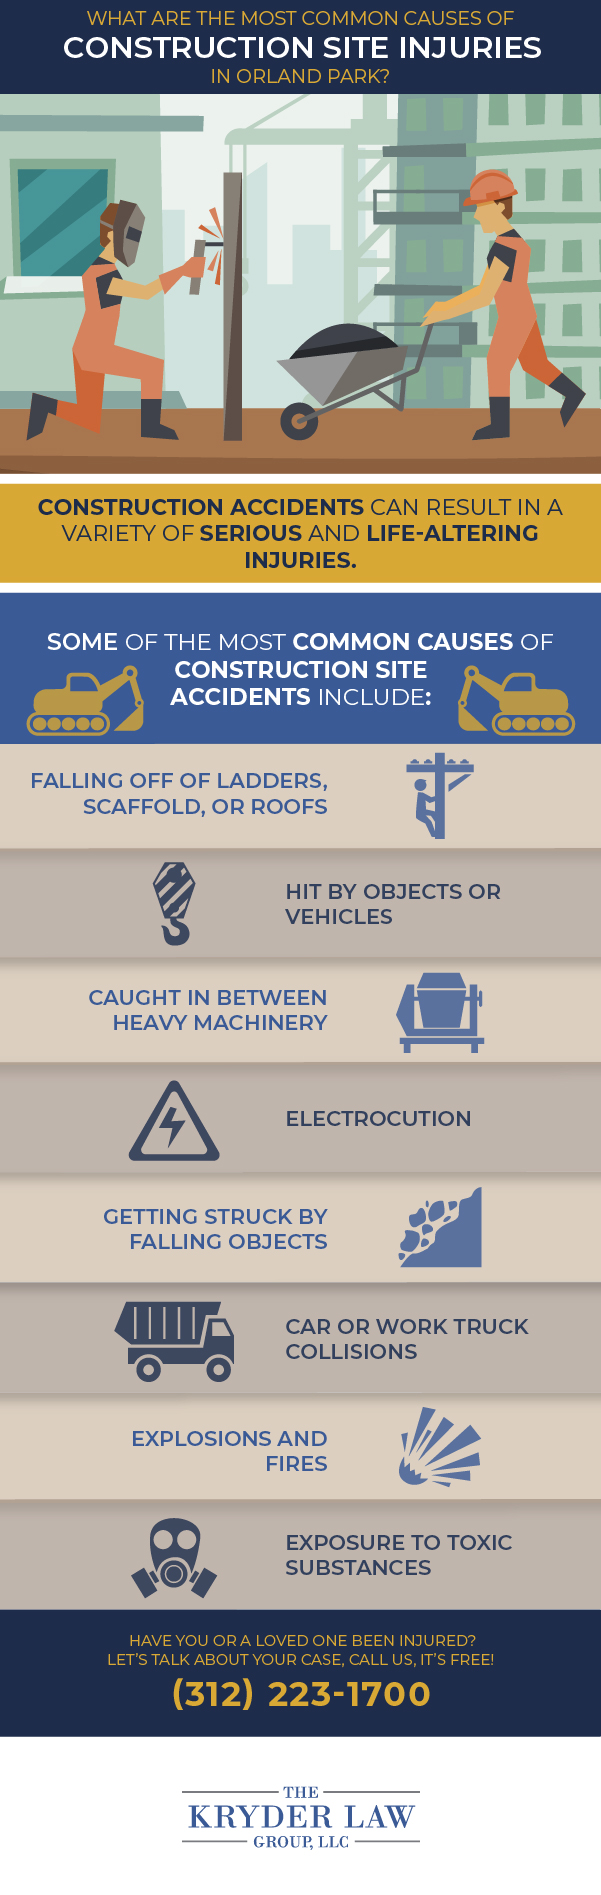 The Benefits of Hiring an Orland Park Construction Accident Lawyer Infographic